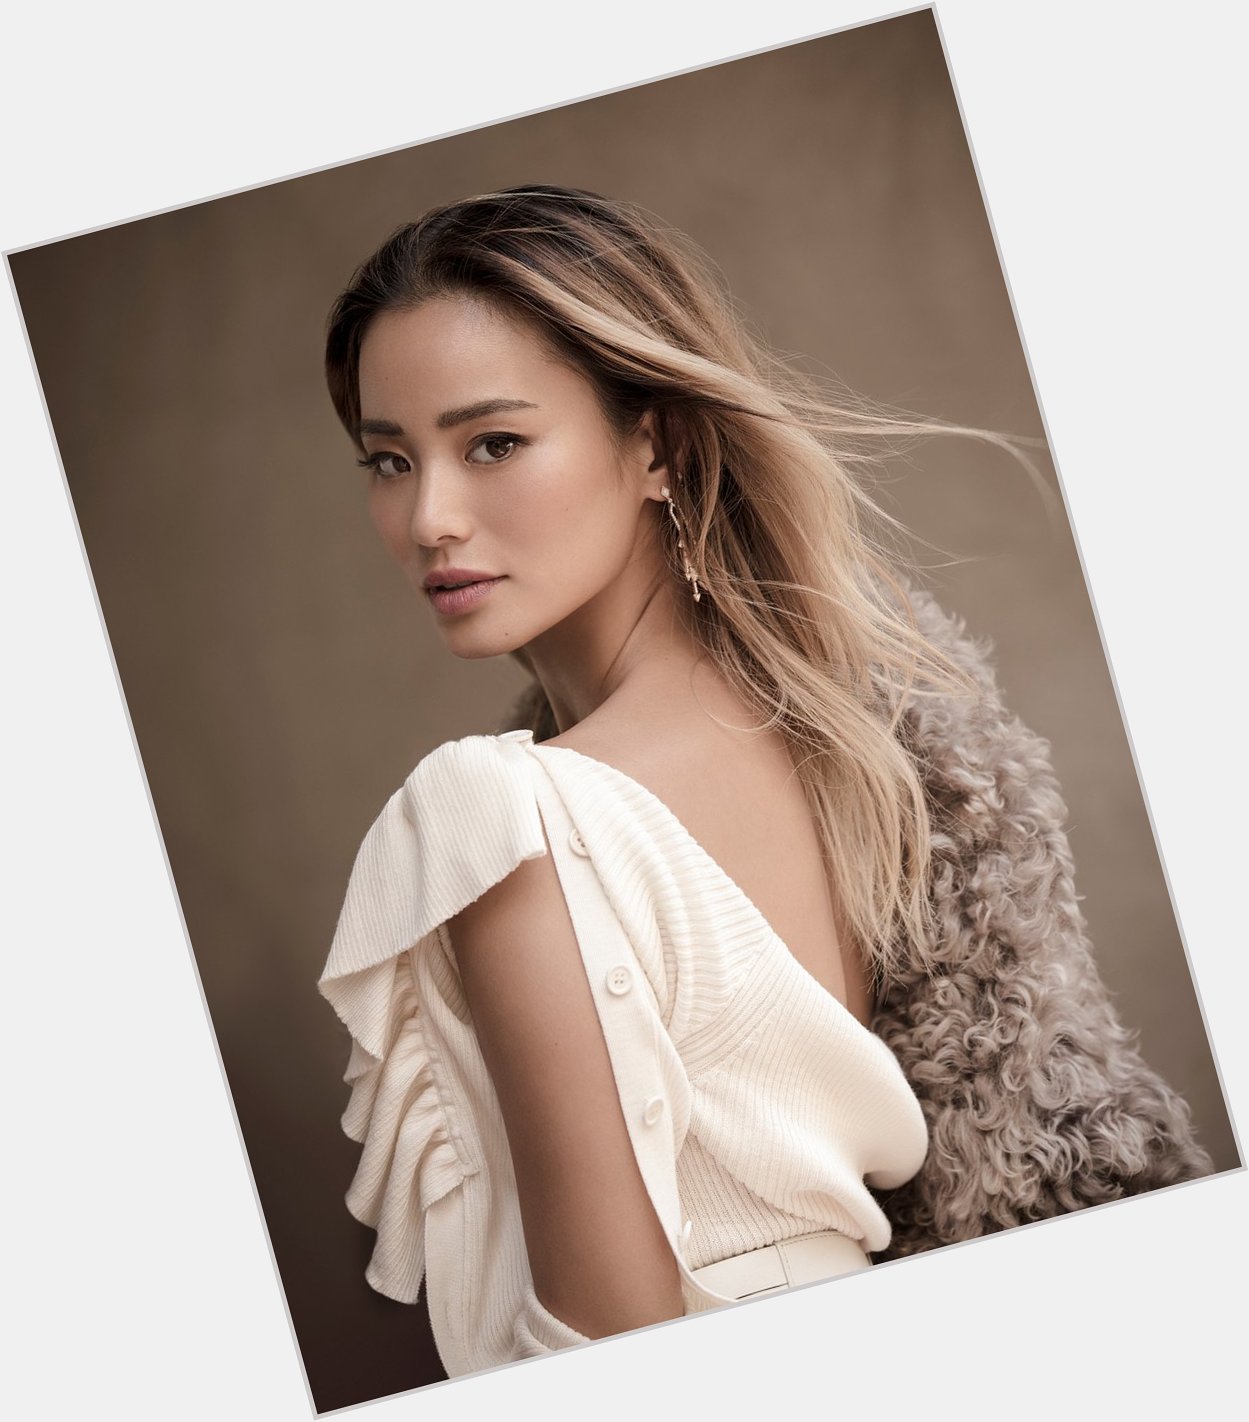 Happy birthday to the lovely Jamie Chung.

Photographed by Frankie Batista. 